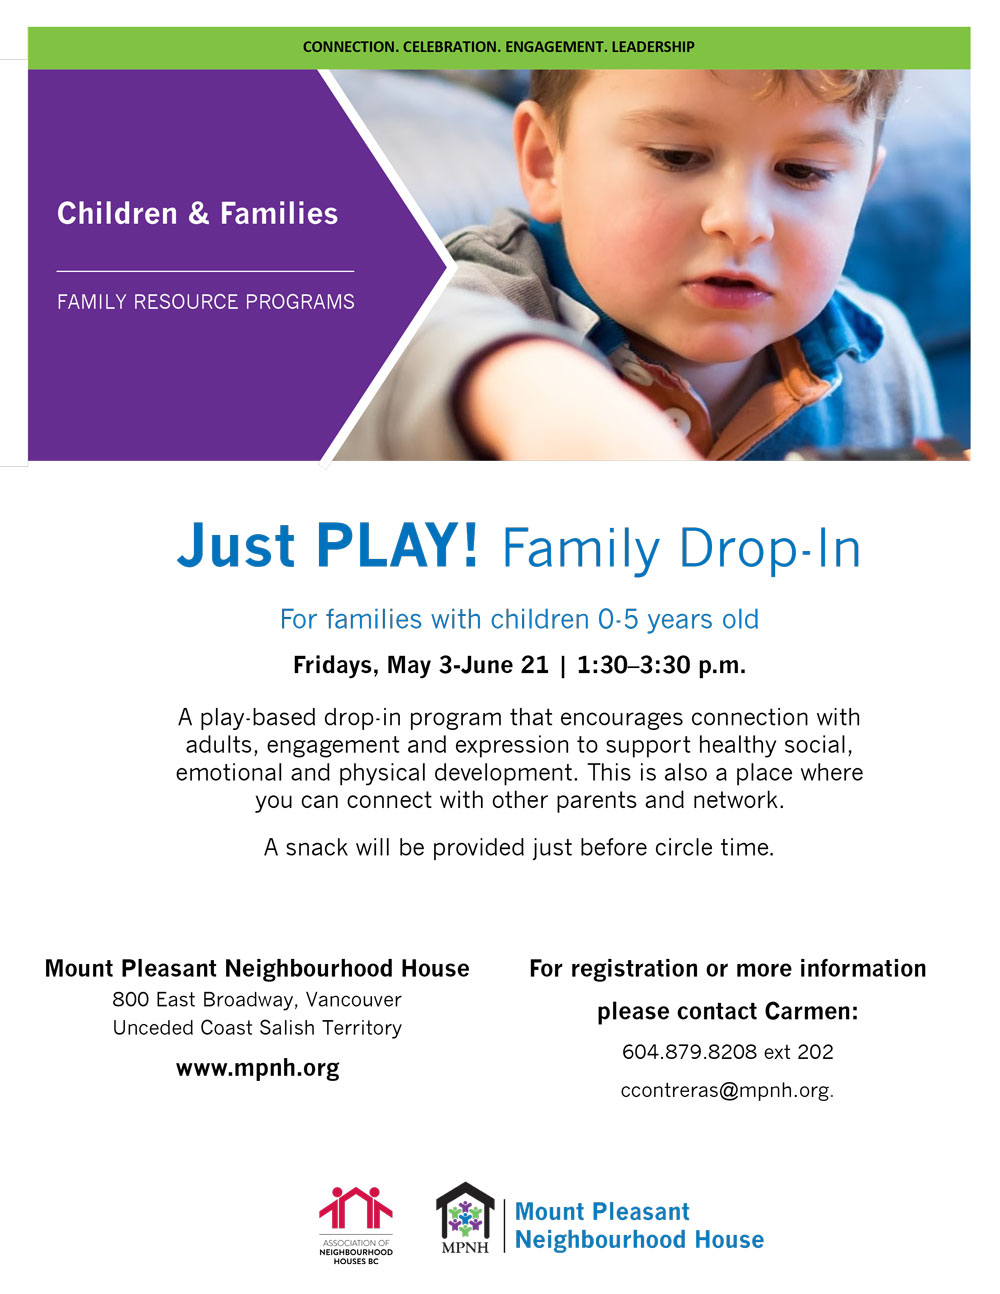 An image of the poster with program details, featuring a child happily playing.